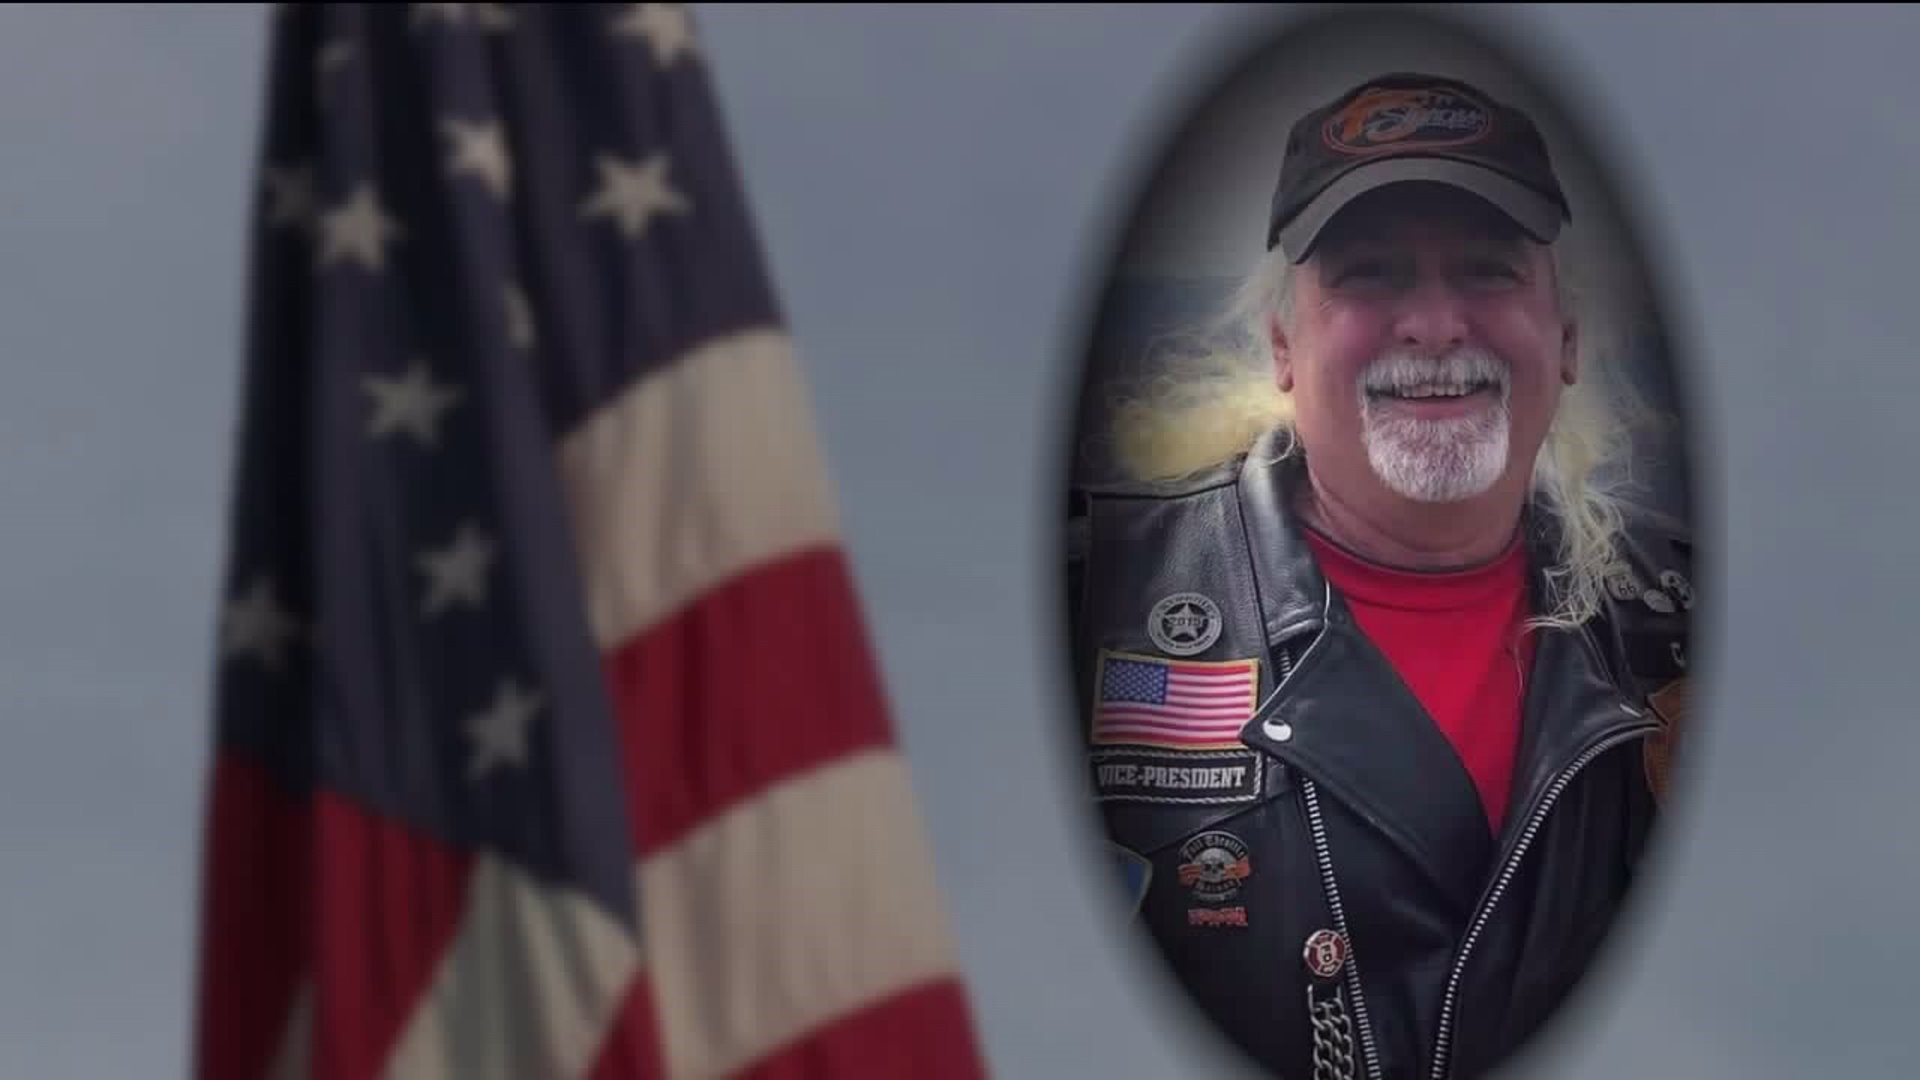 Motorcycle Organization Comes Together to Mourn Loss of One of Their Own